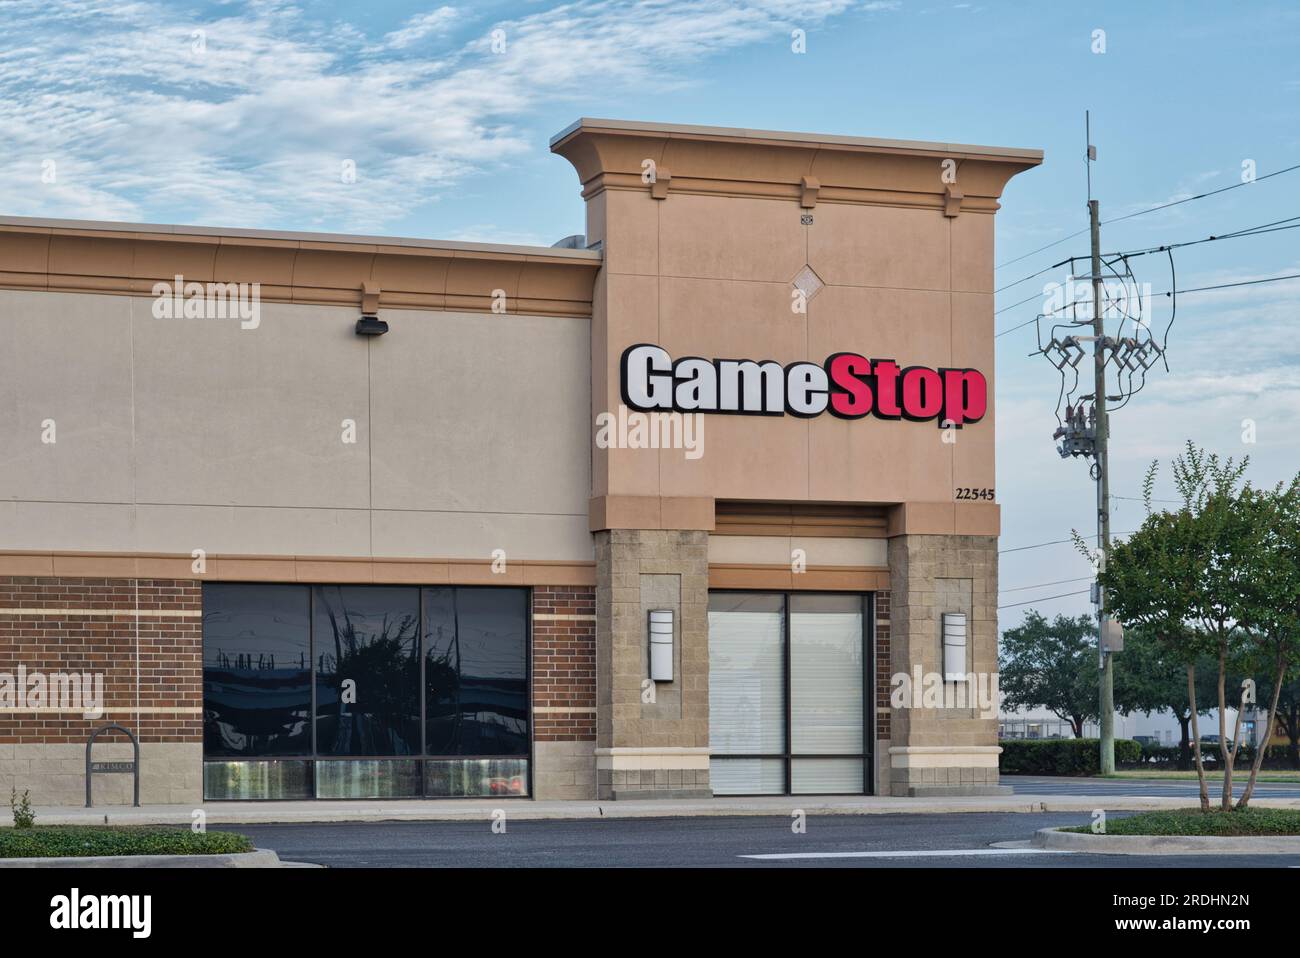 How GameStop Can Avoid the Retail Apocalypse